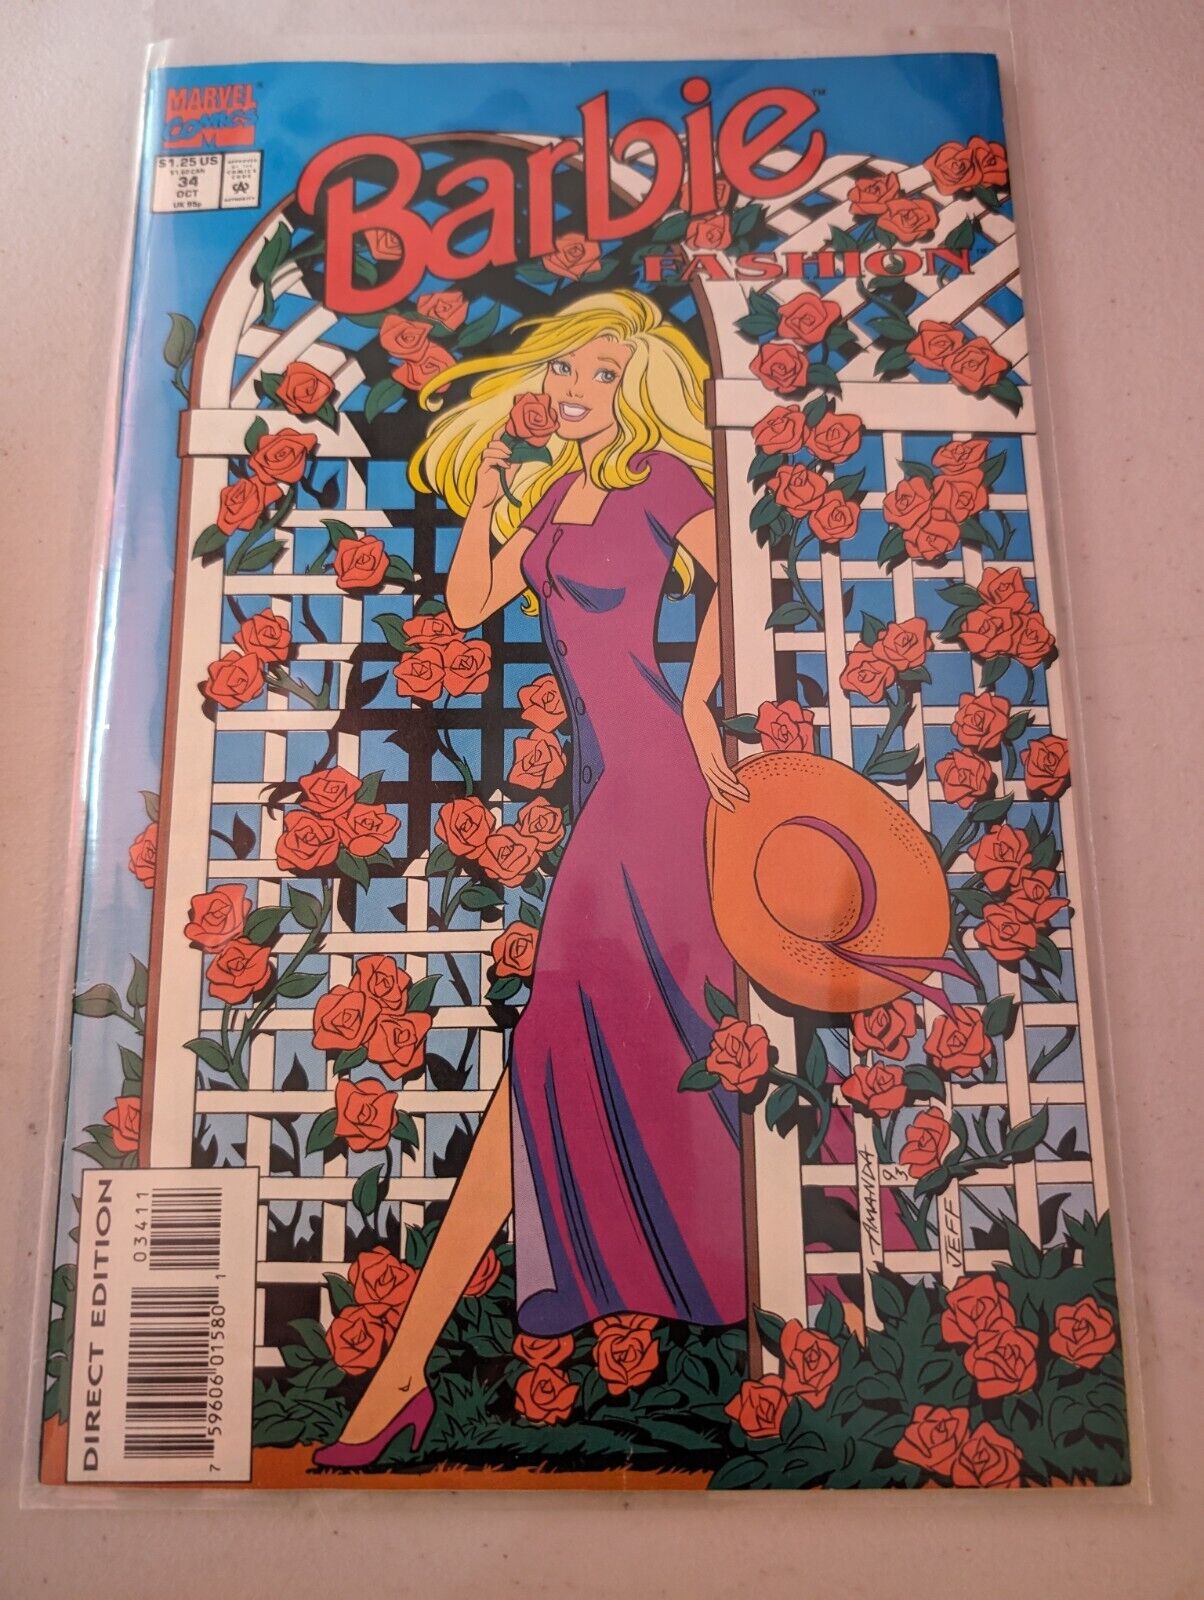 Vintage 1993 BARBIE Fashion, Marvel Comic Book - 1991 SERIES - Issue October #34